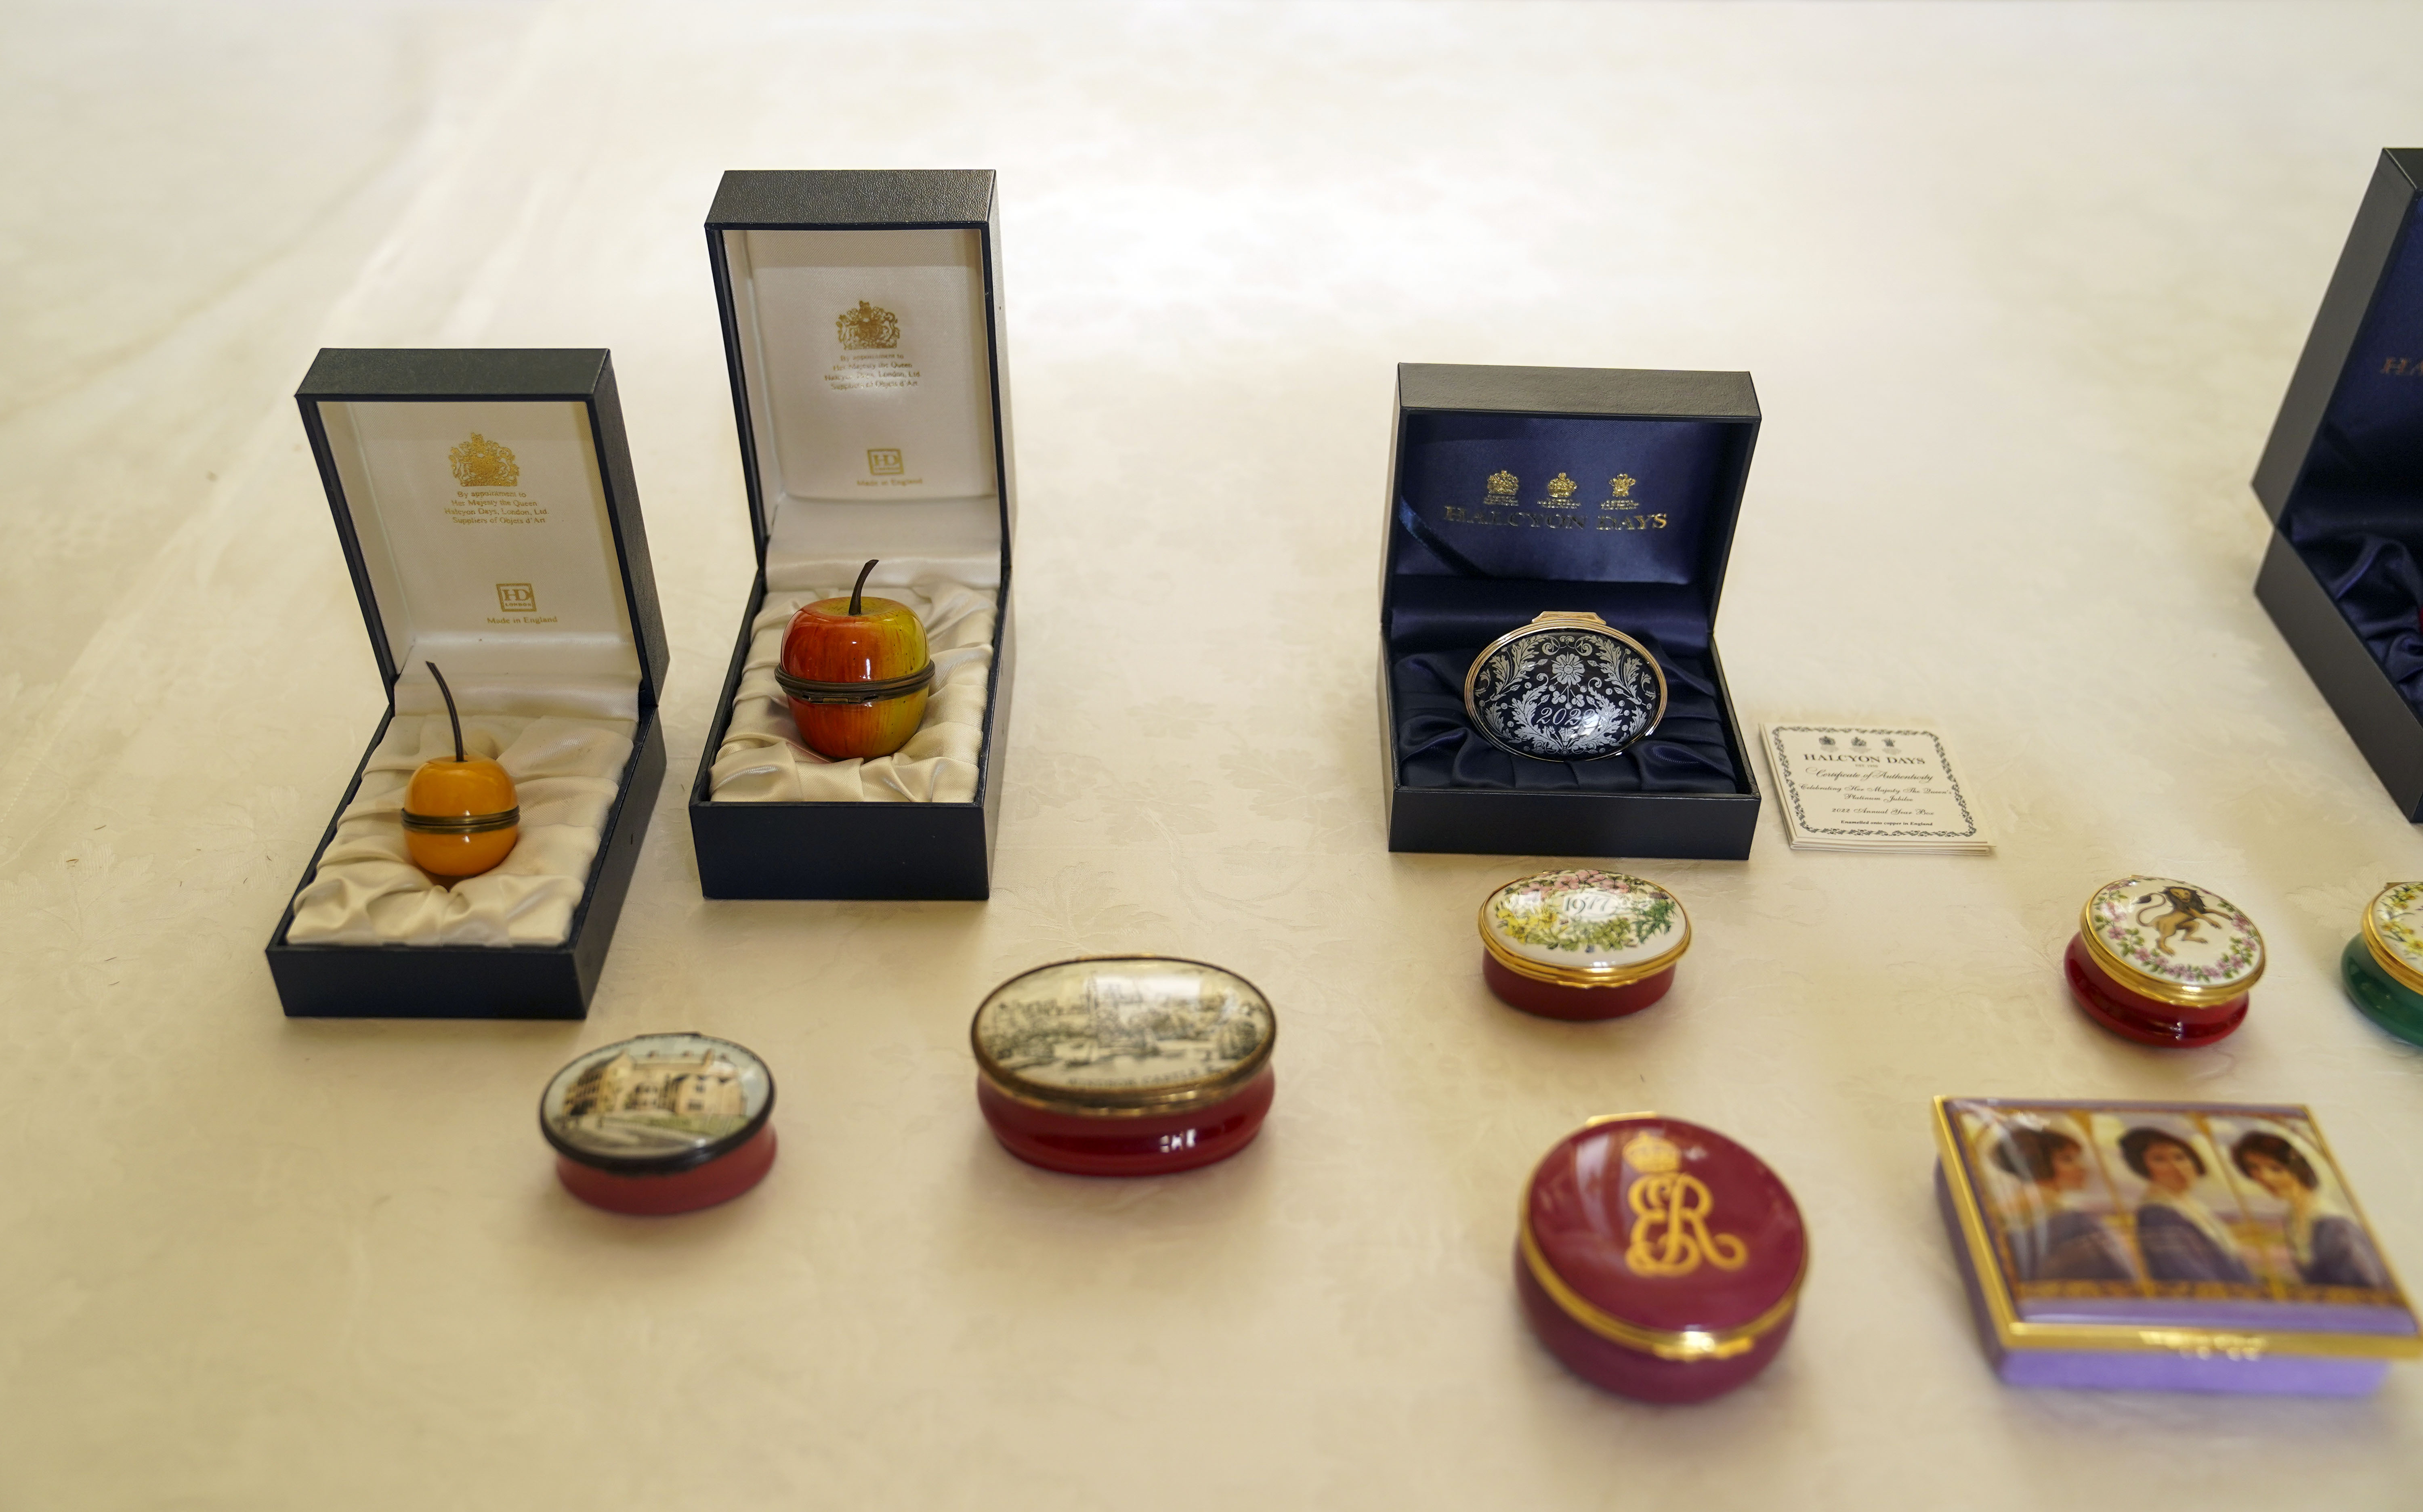 The display of artefacts 